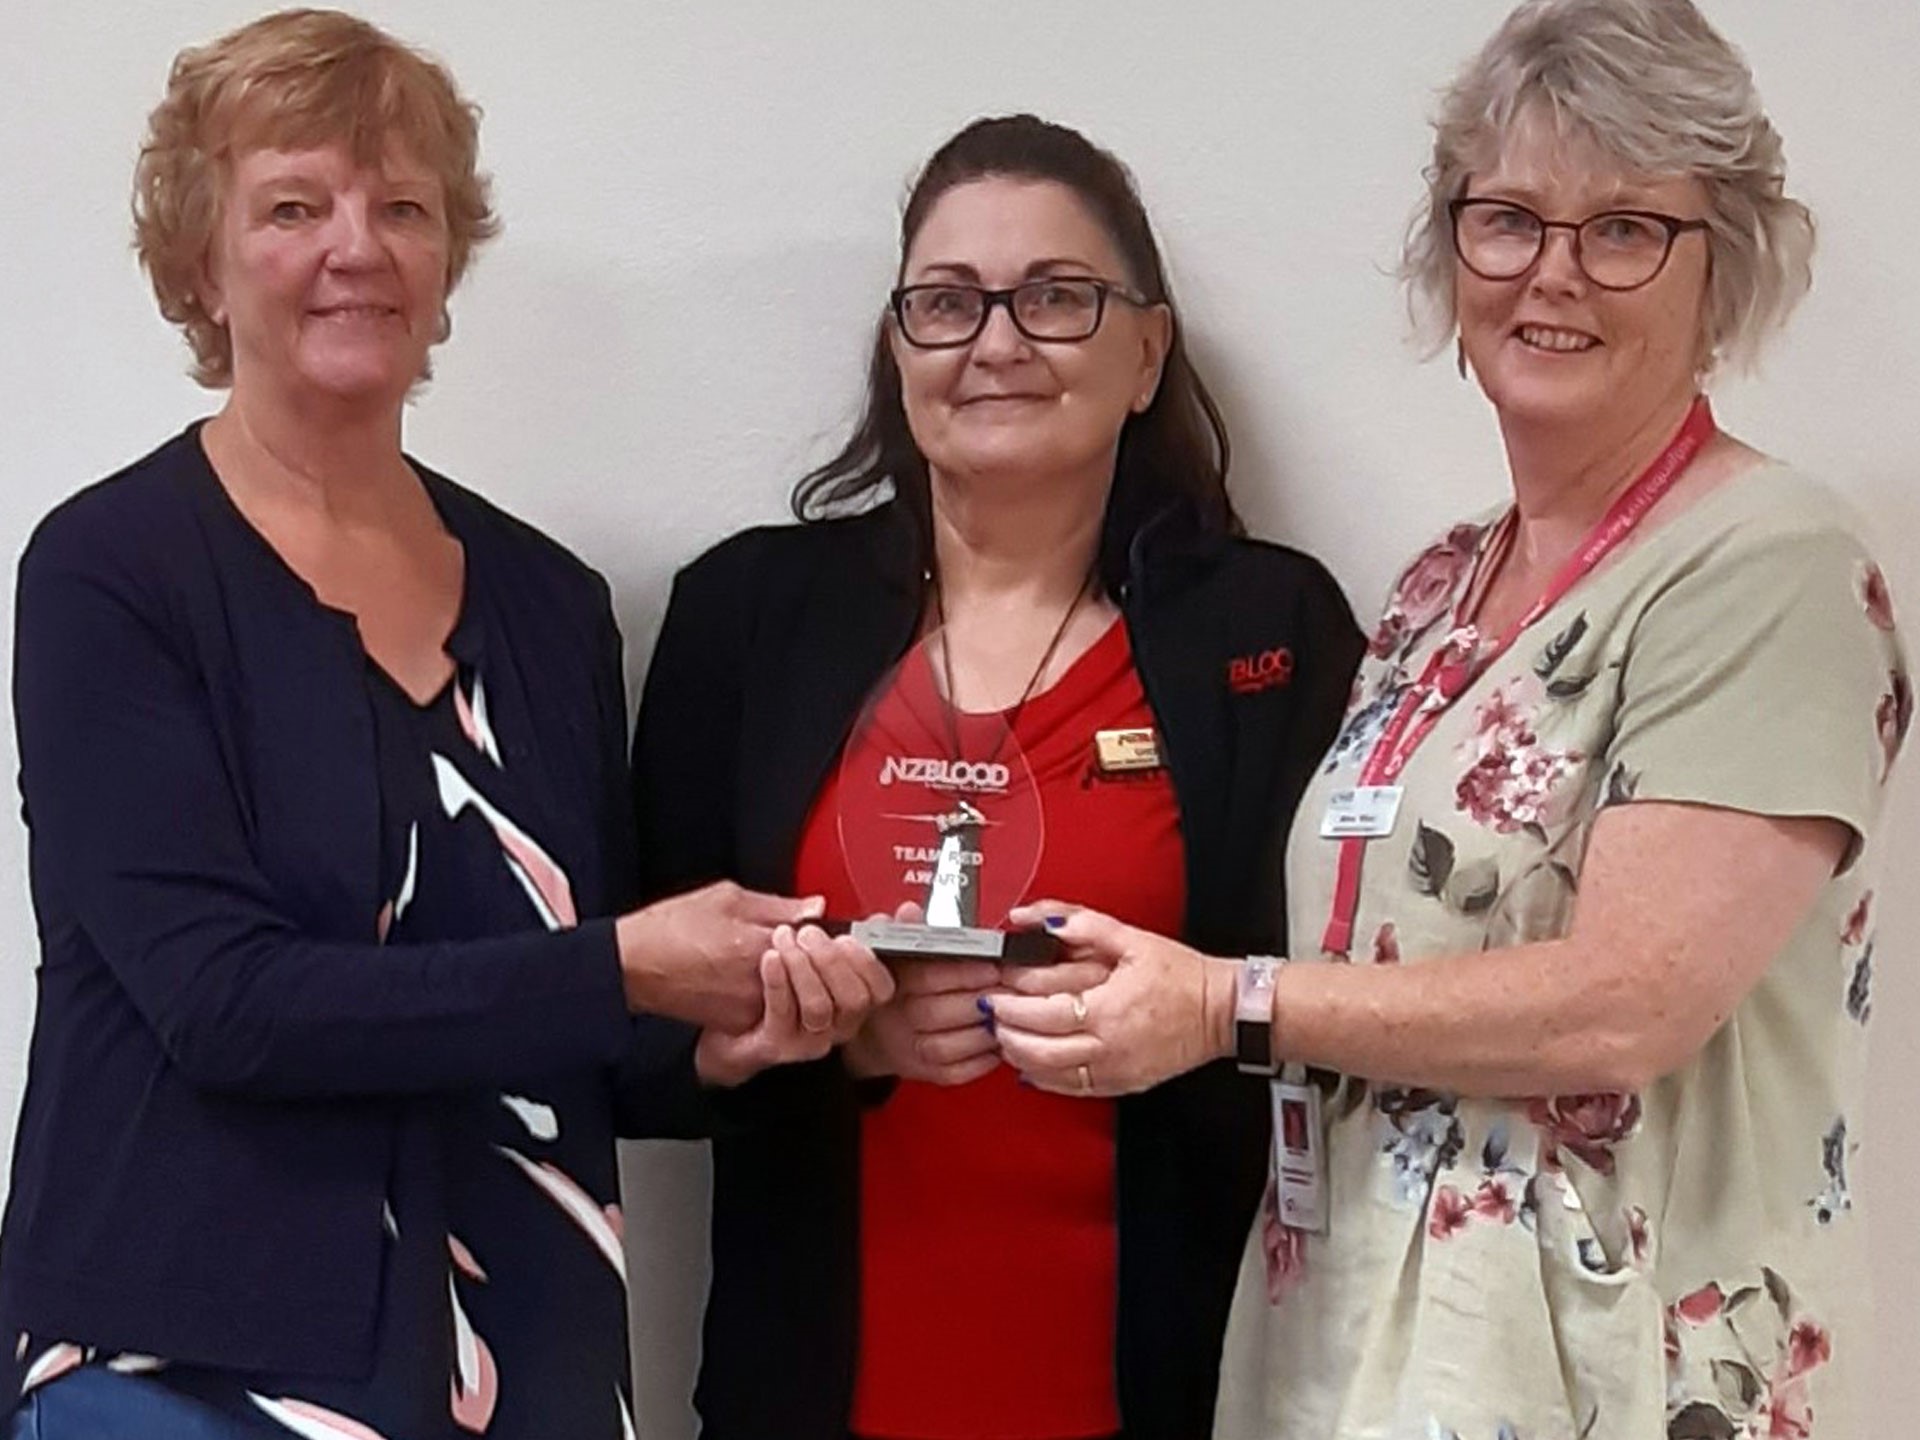 Tauranga Hospital blood donor ‘heroes’ recognised for gift of life